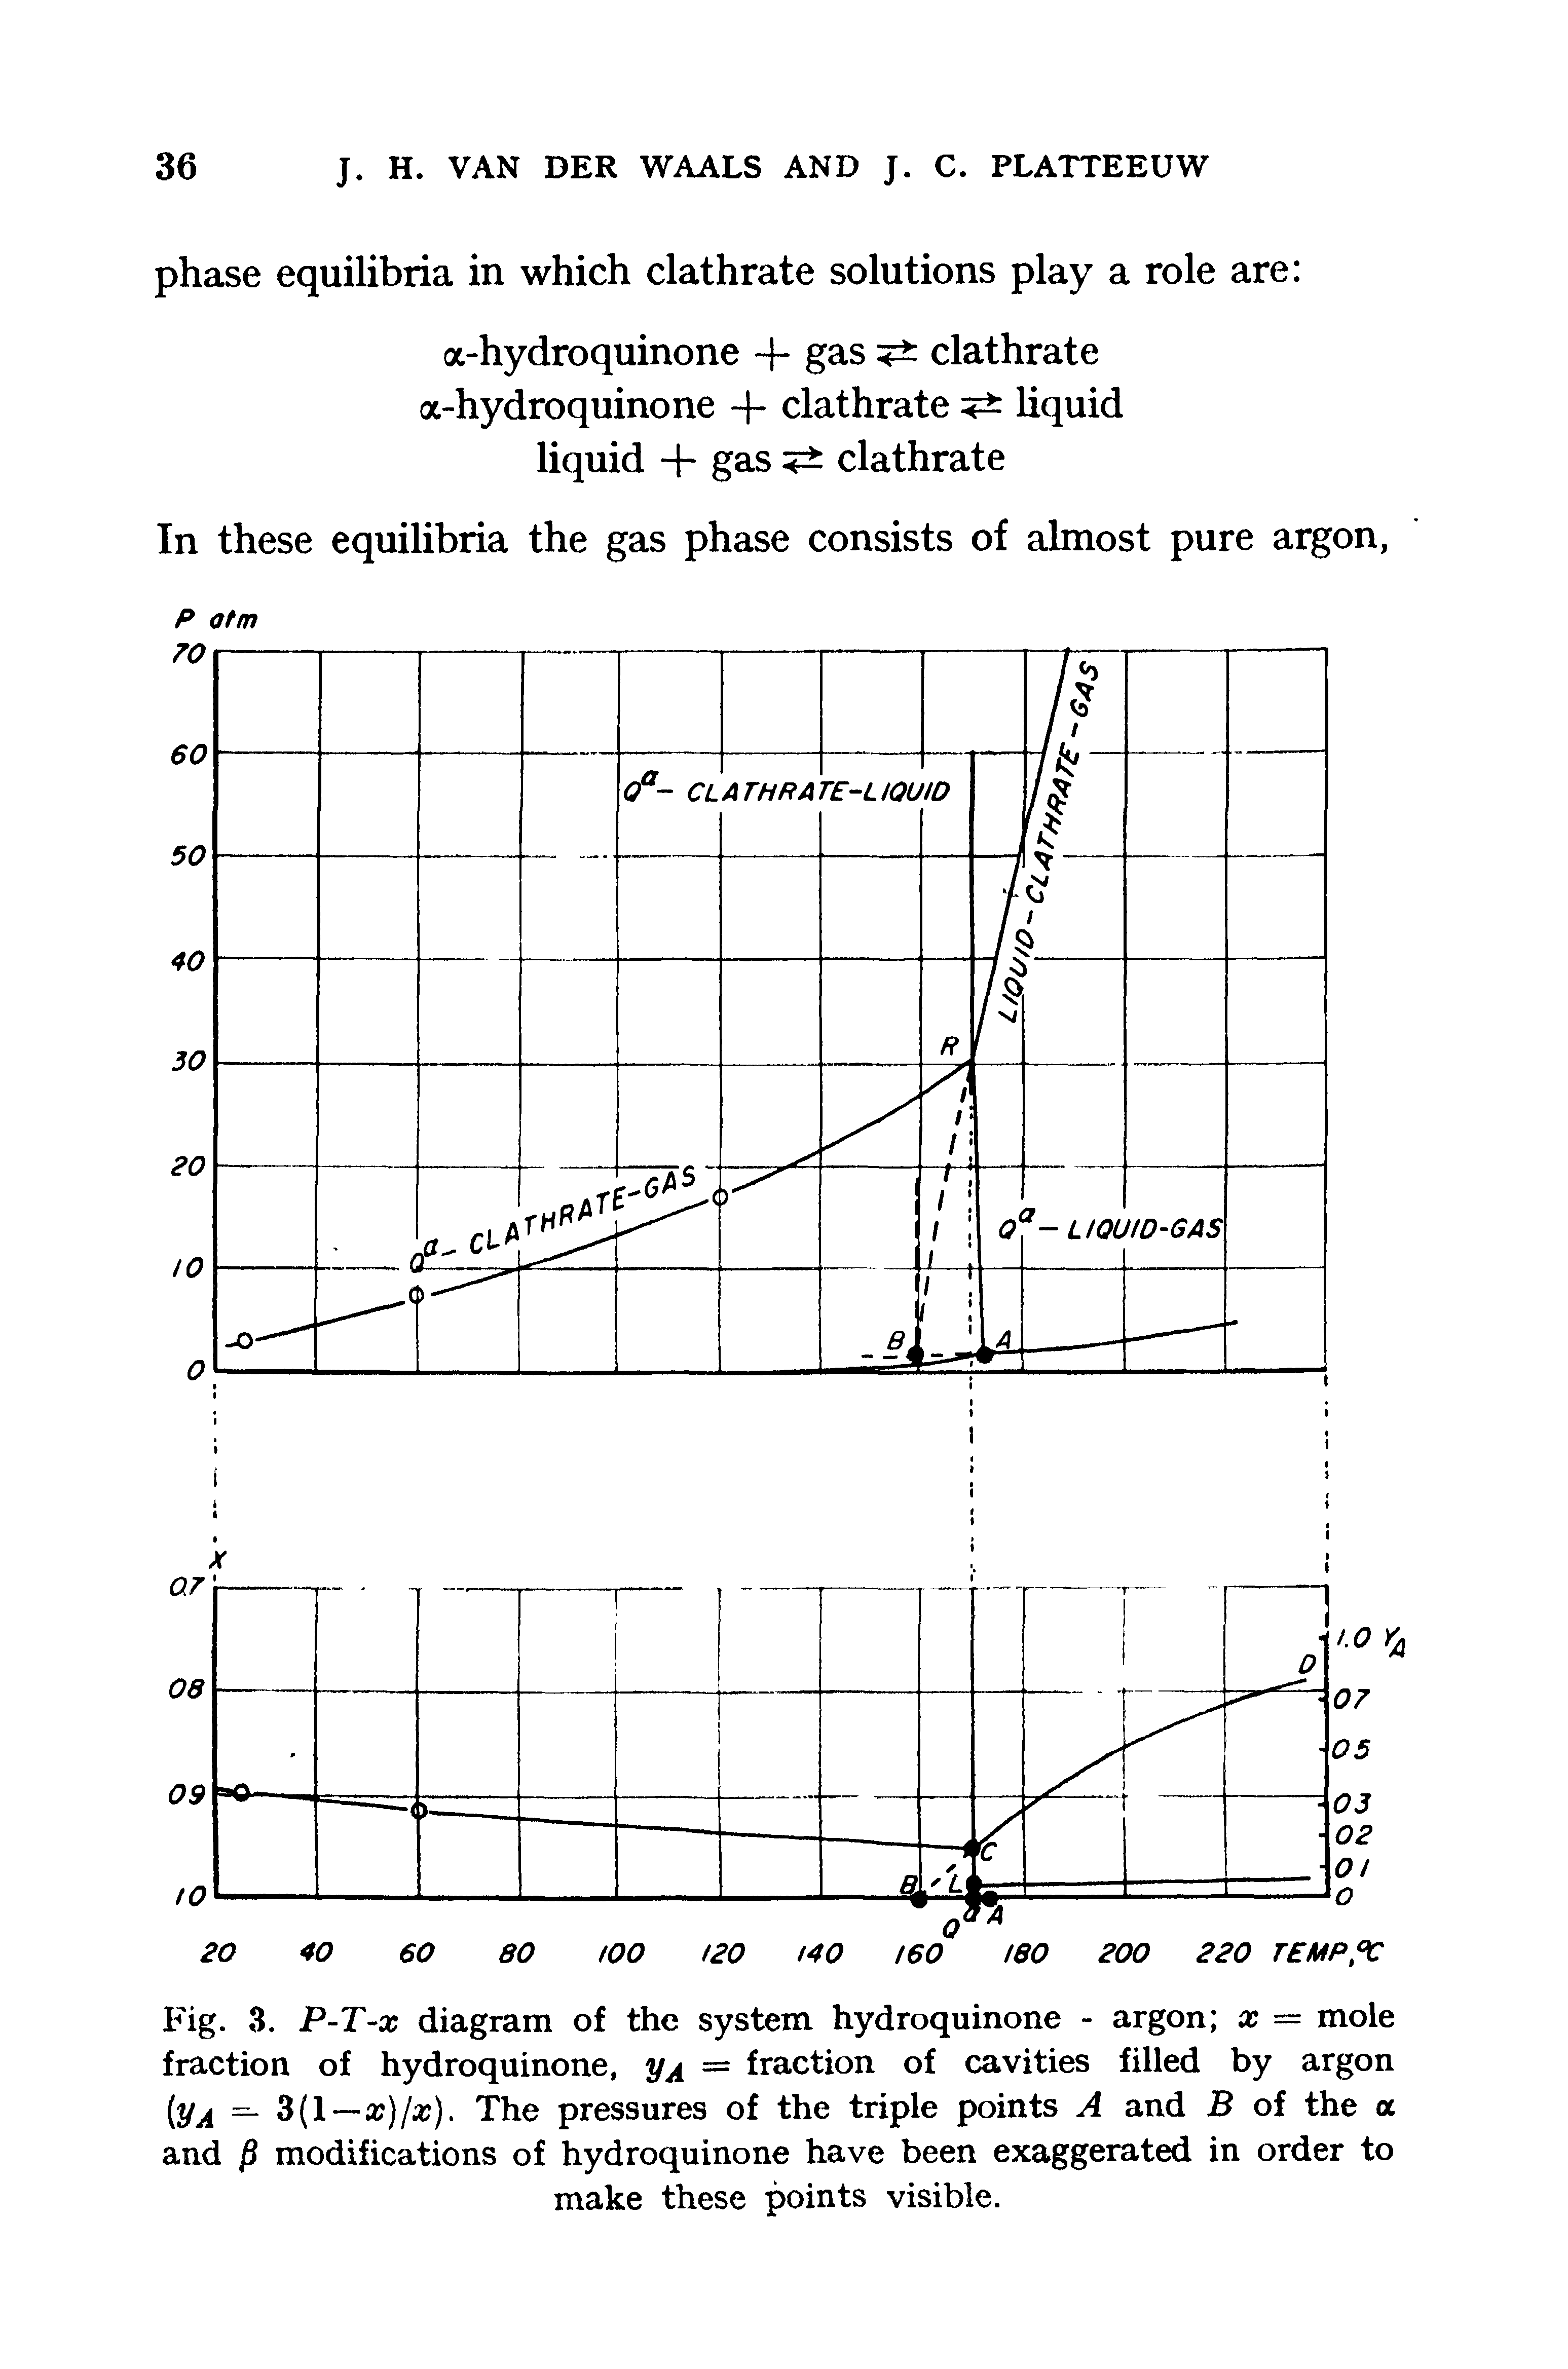 Fig. 3. P-T-x diagram of the system hydroquinone - argon x — mole fraction of hydroquinone, = fraction of cavities filled by argon [yA =. 3(l — x)/x). The pressures of the triple points A and B of the a and ft modifications of hydroquinone have been exaggerated in order to make these points visible.